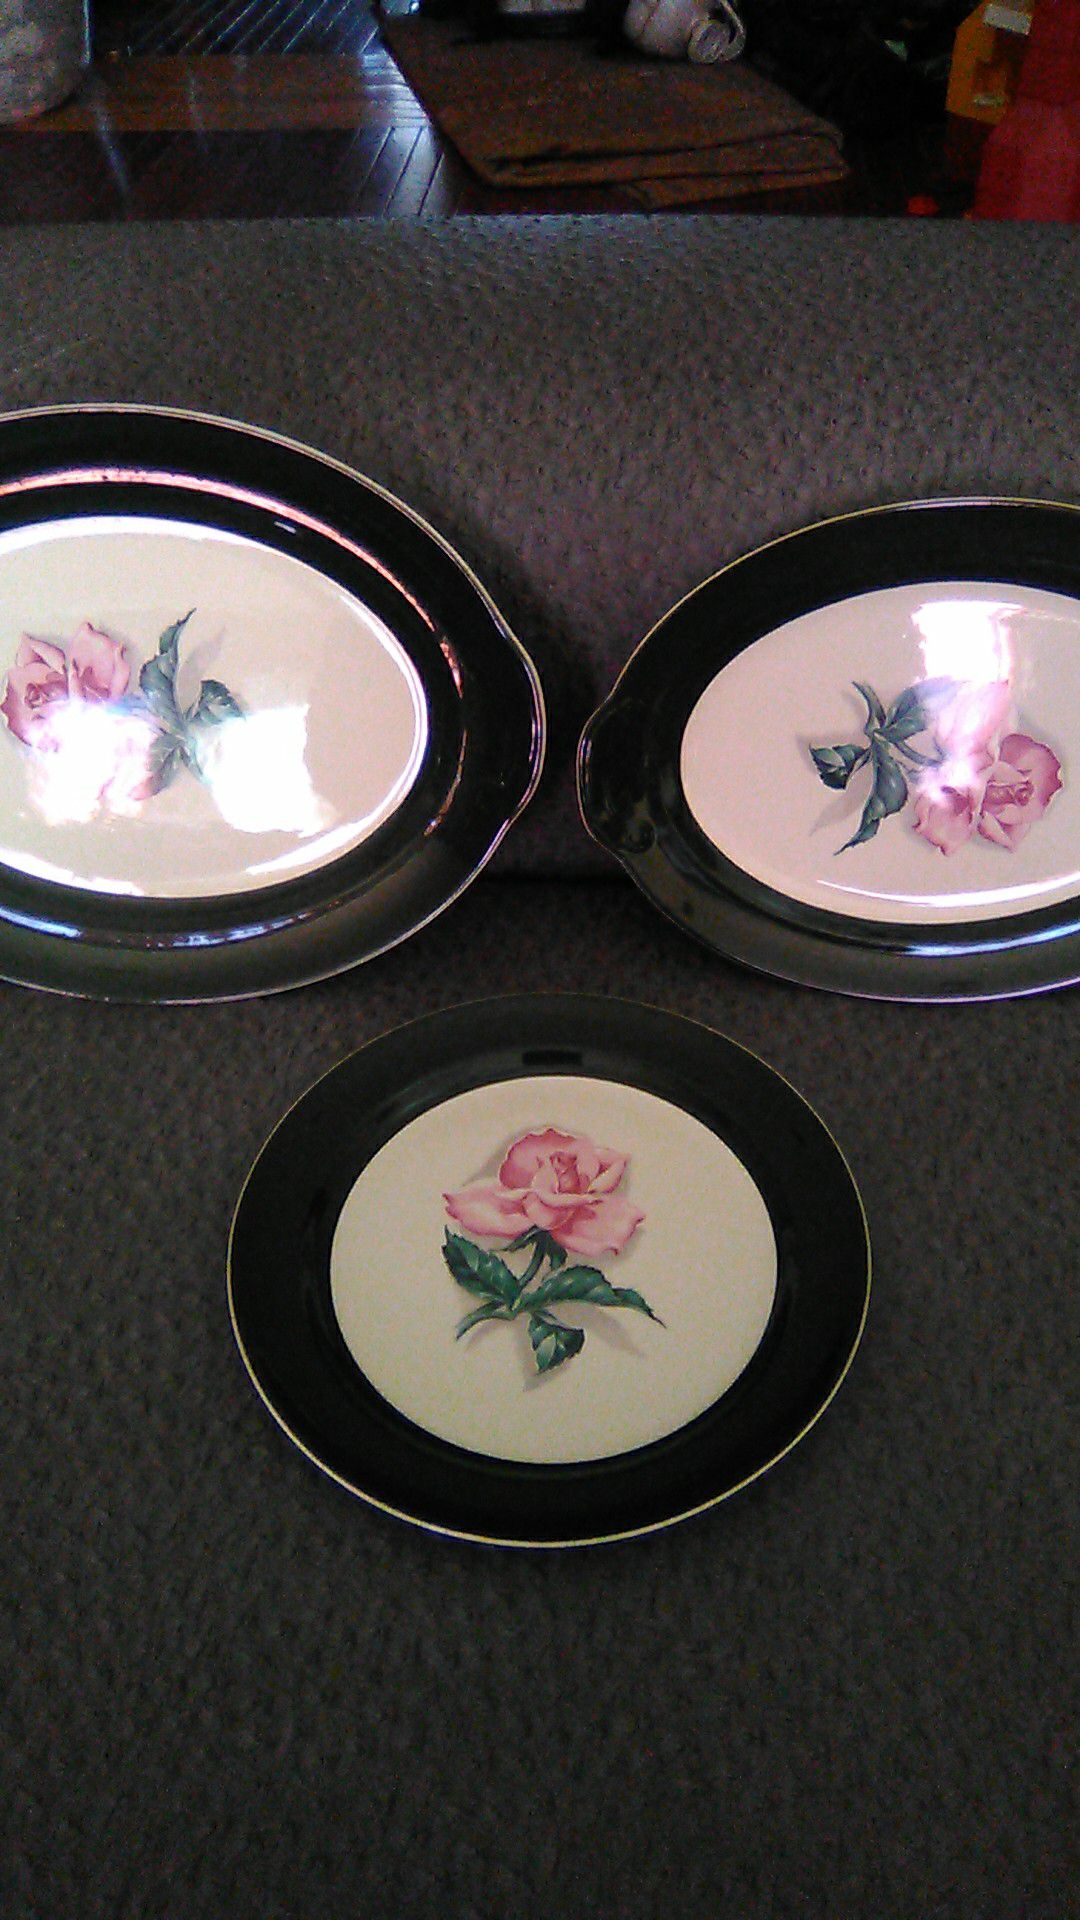 Vintage Taylor Smith Platters and Plate